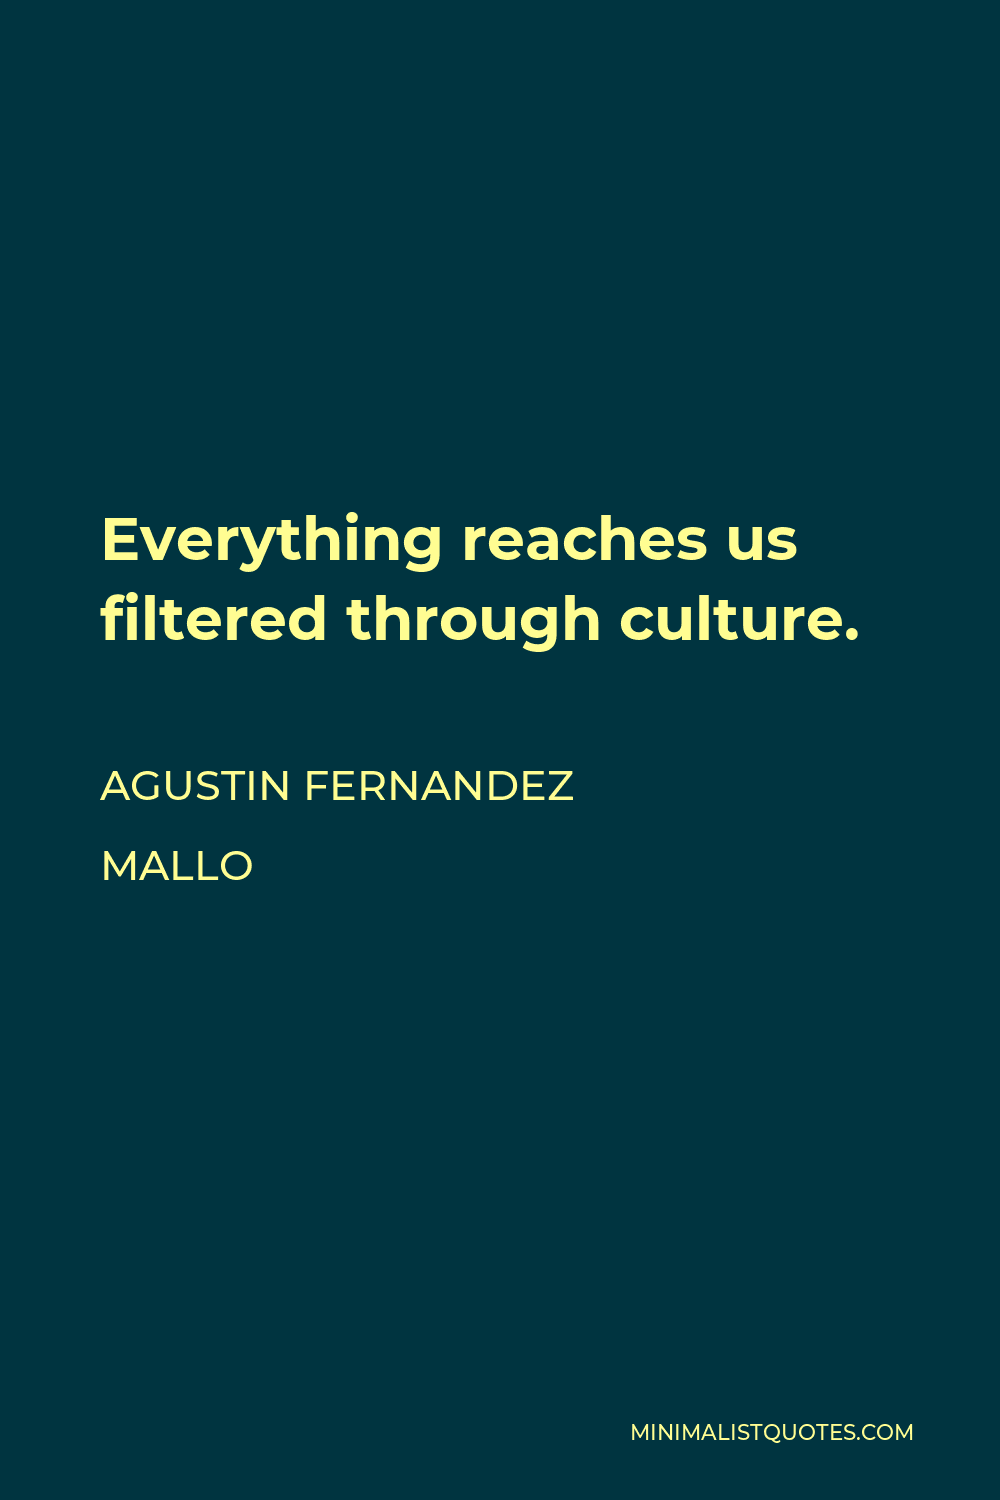 Agustin Fernandez Mallo Quote - Everything reaches us filtered through culture.